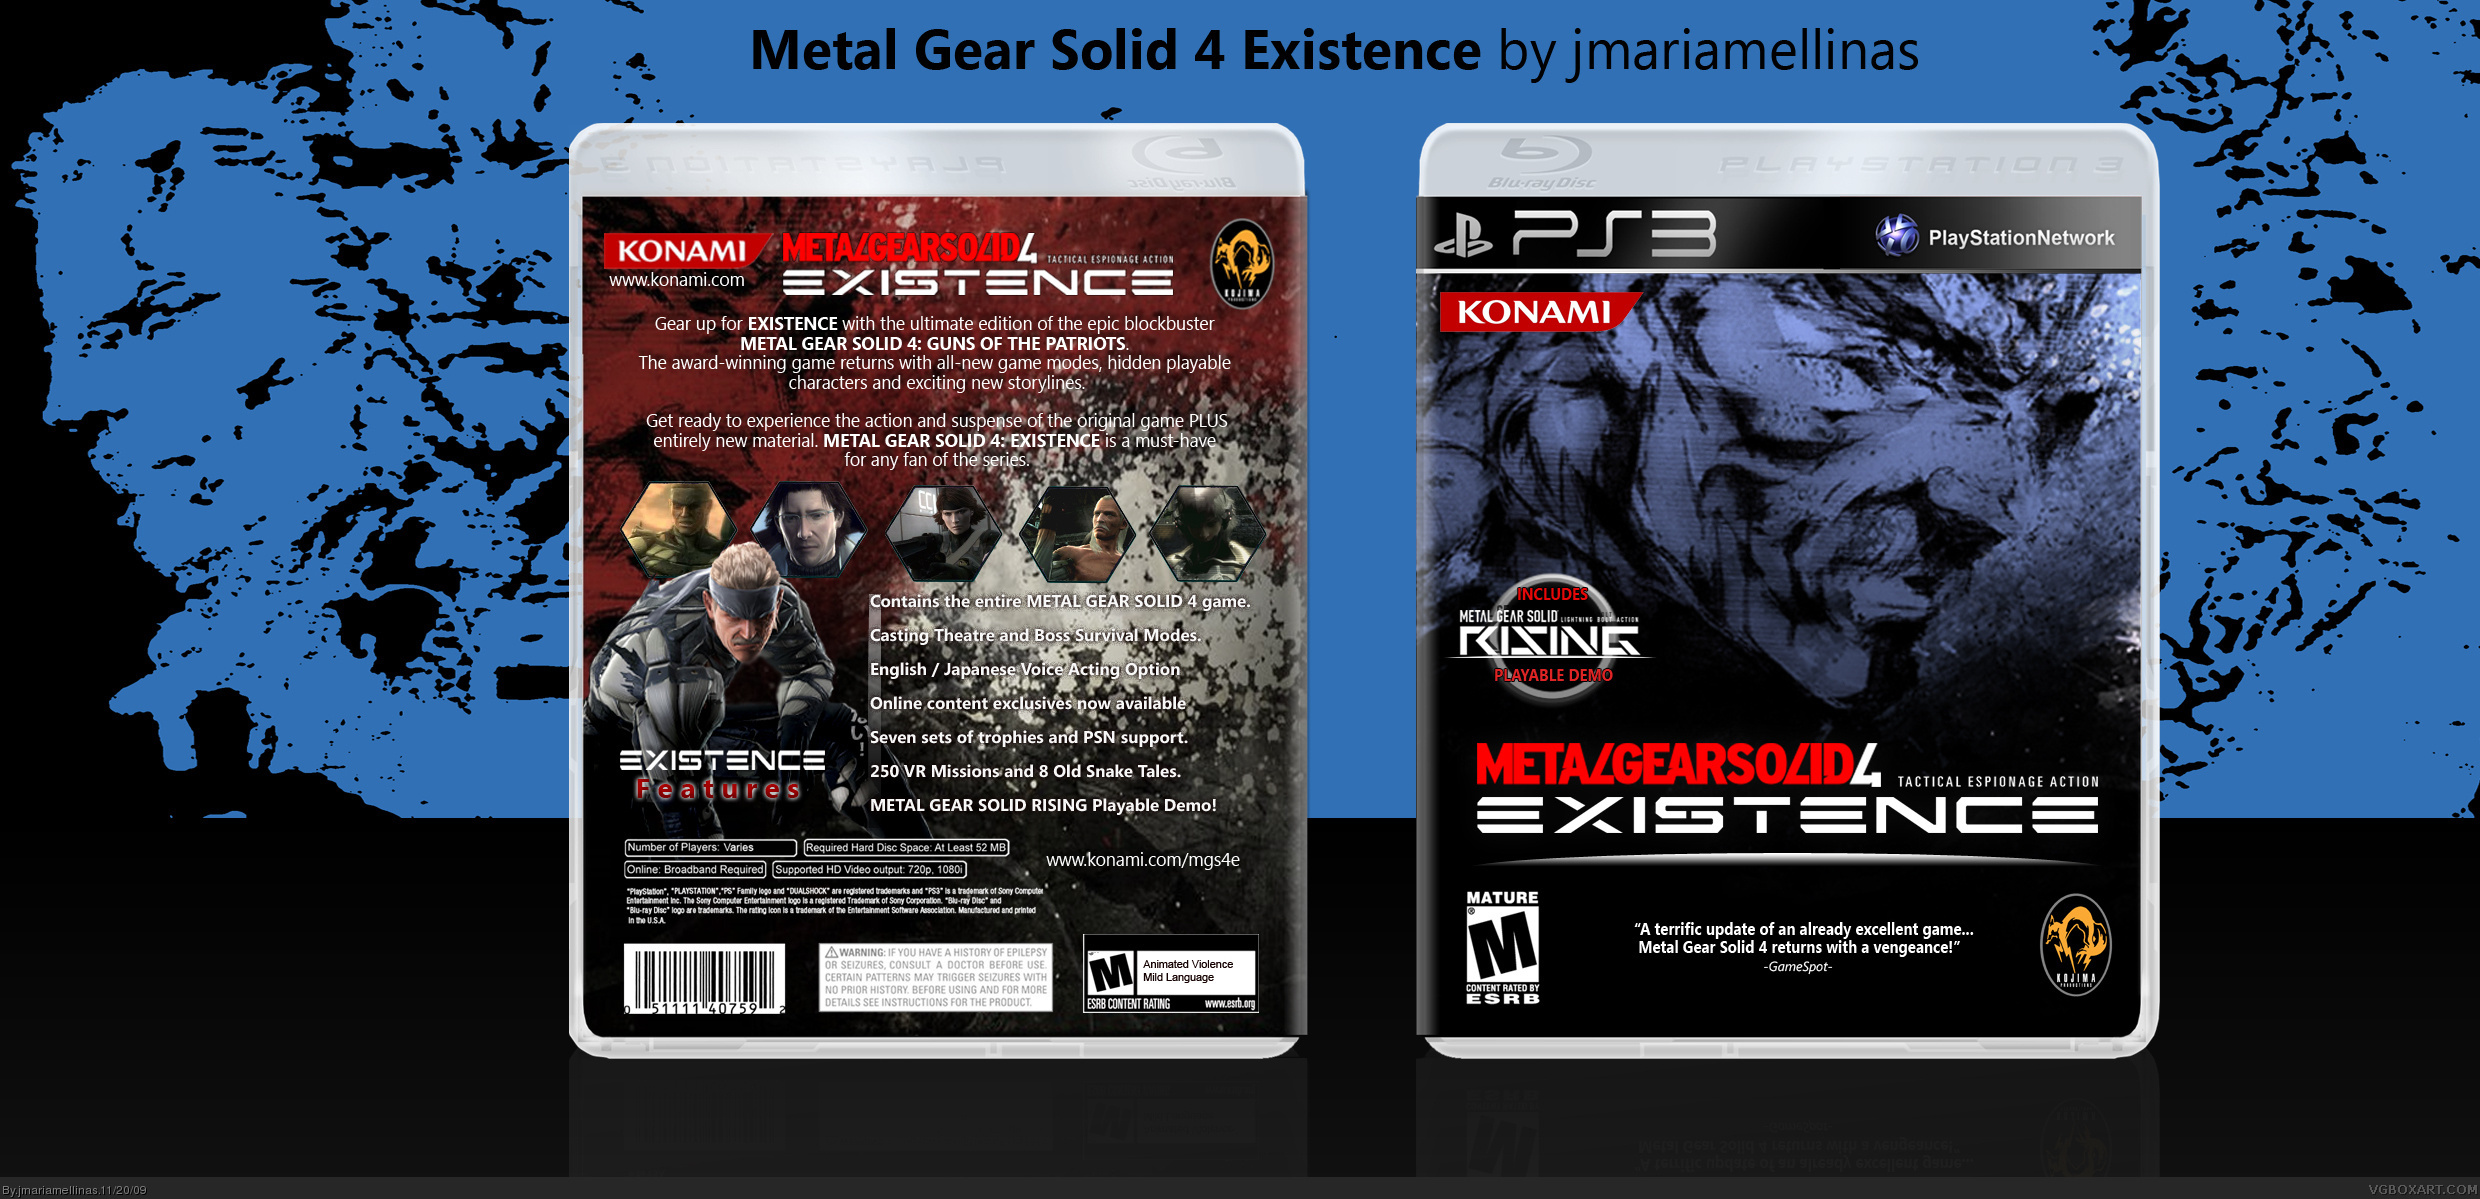 Metal Gear Solid 4: Existence box cover